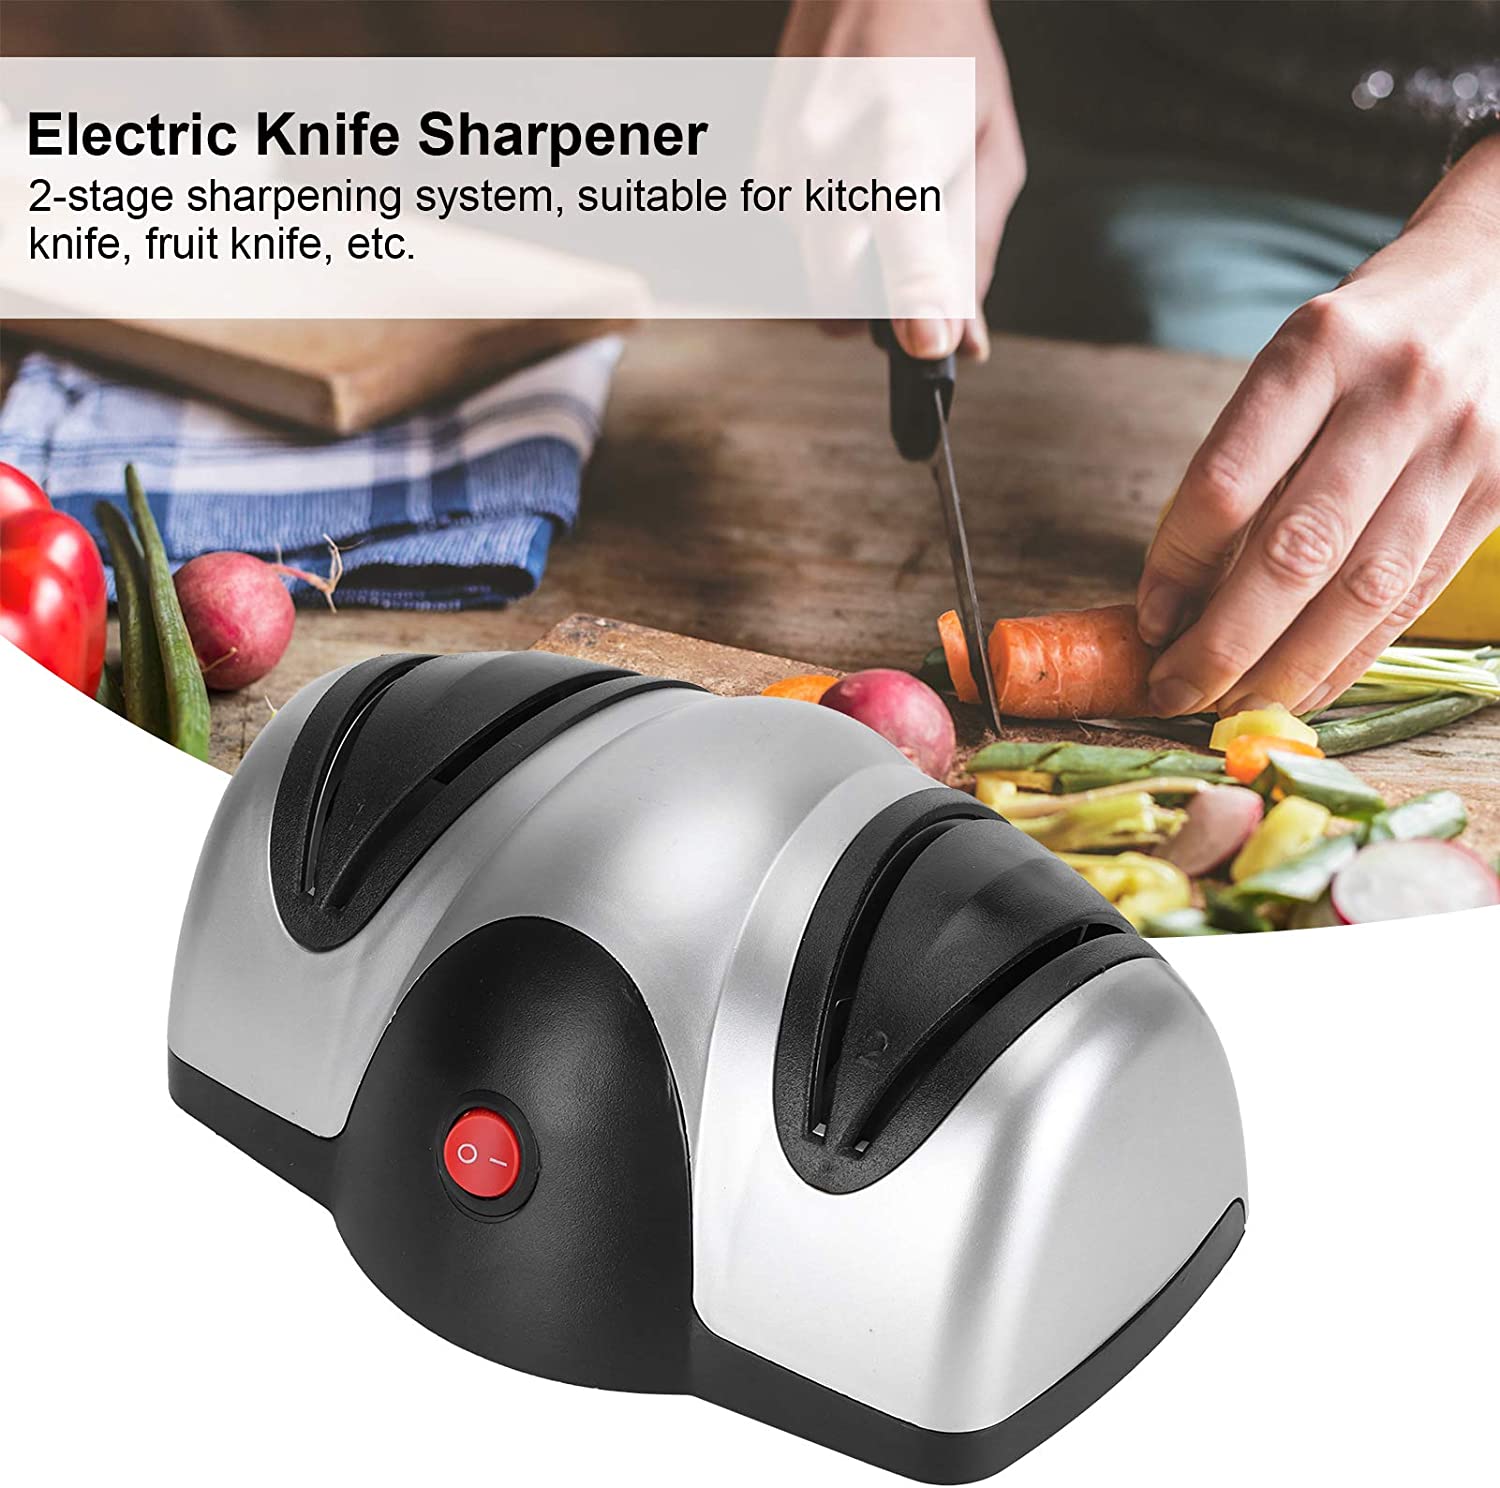 Someone using a knife after sharpening it with the help of a Professional Kitchen Electric Knife Sharpener